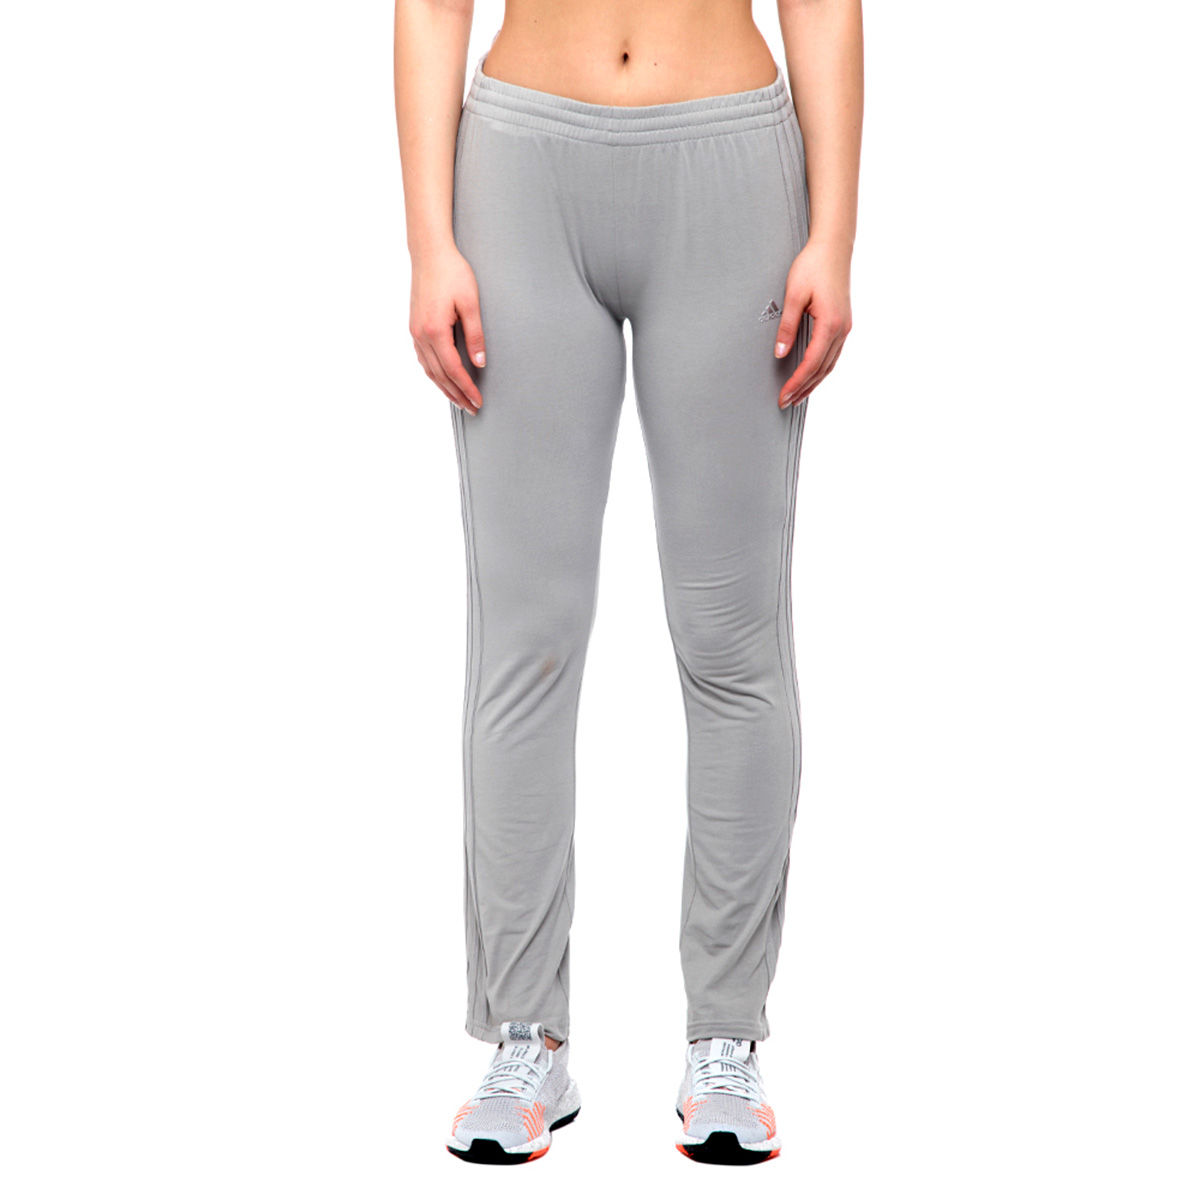 Adidas Tights  Shop for Adidas Tight Online in India  Myntra